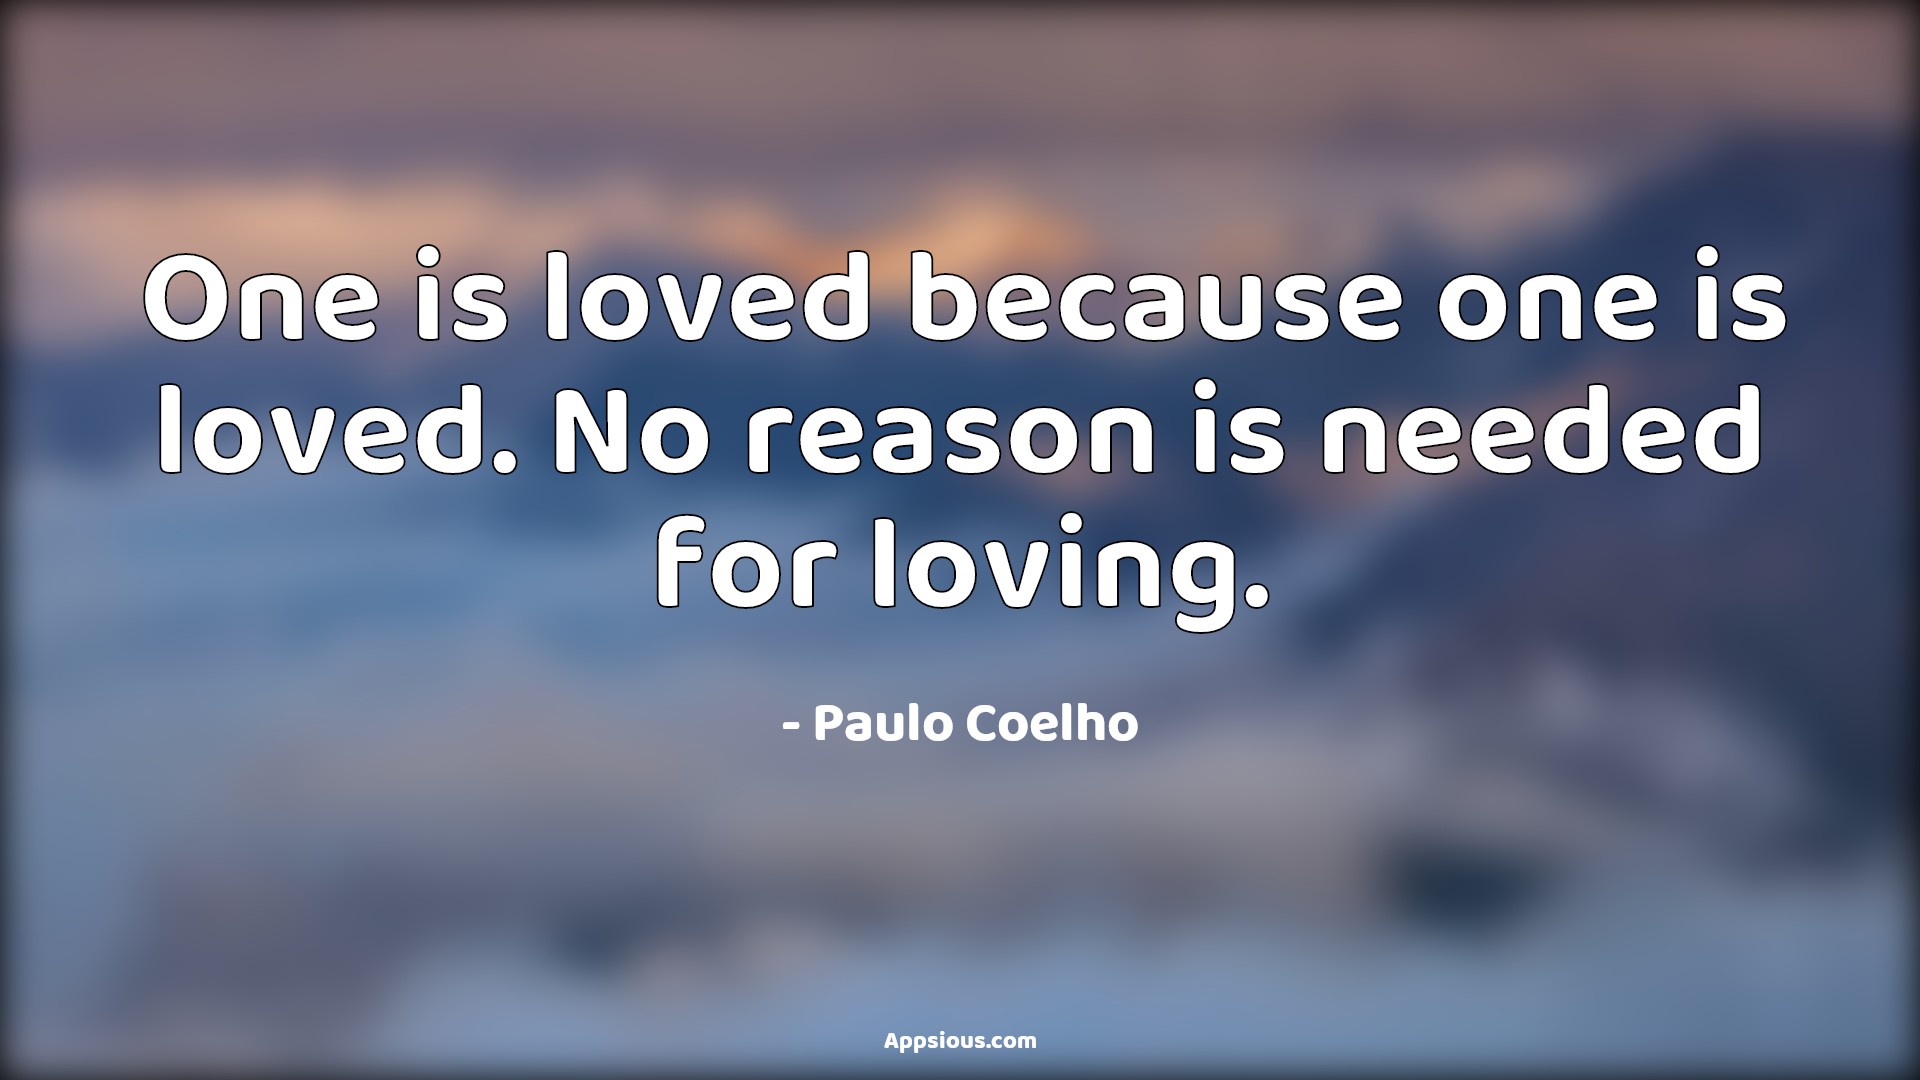 One is loved because one is loved. No reason is needed for loving ...